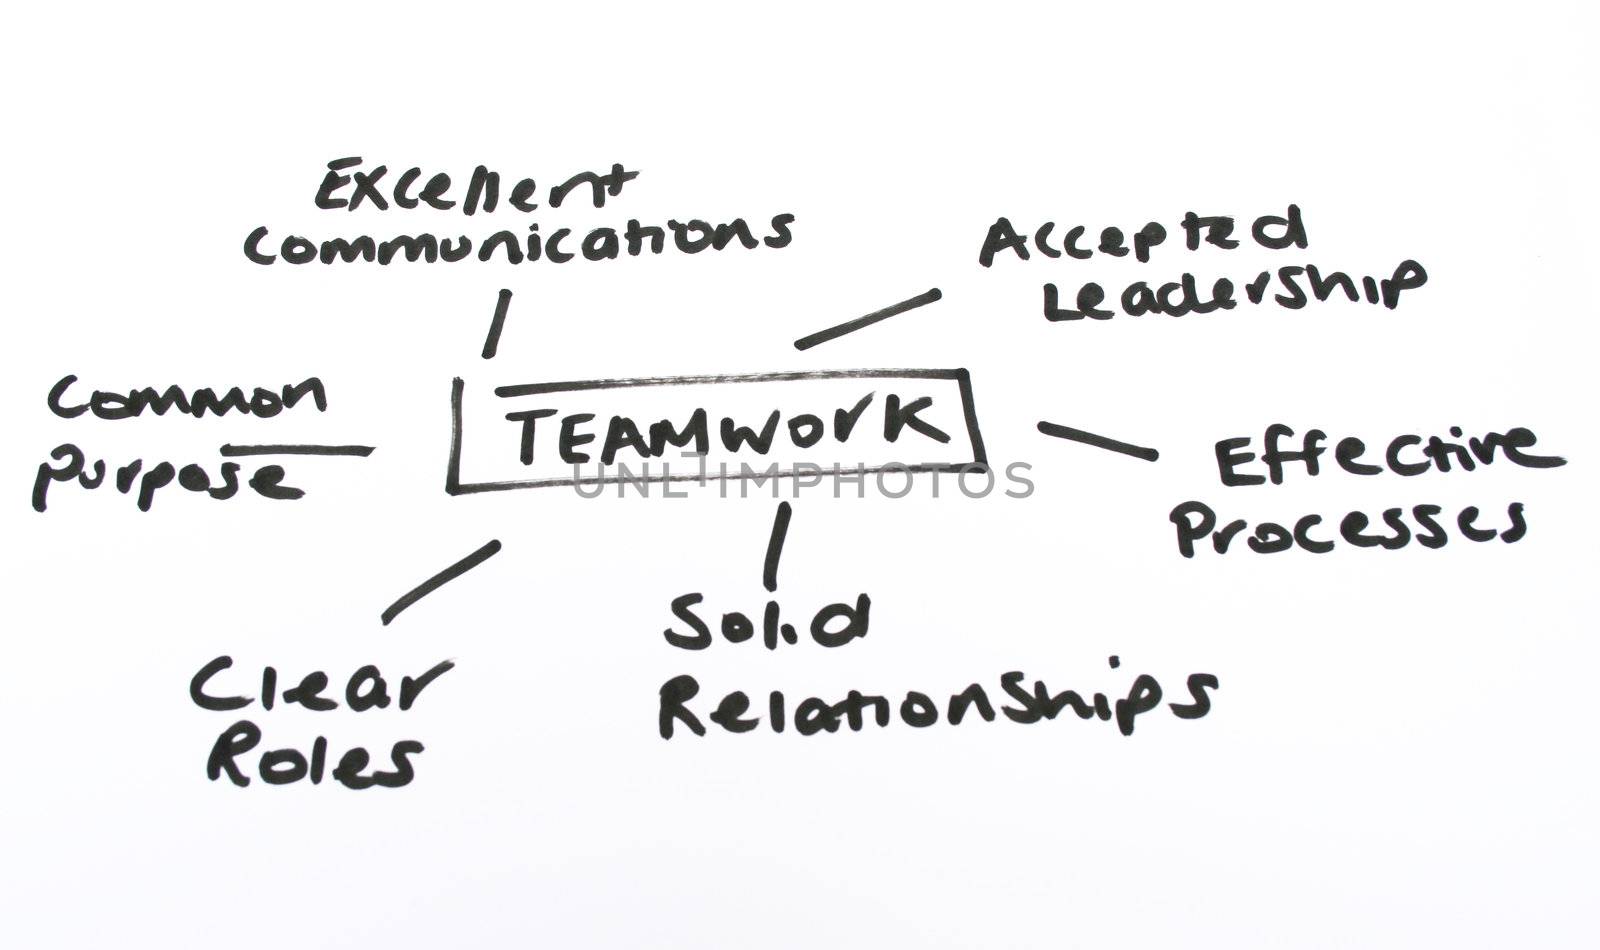 drawn diagram depicting the meaning of teamwork